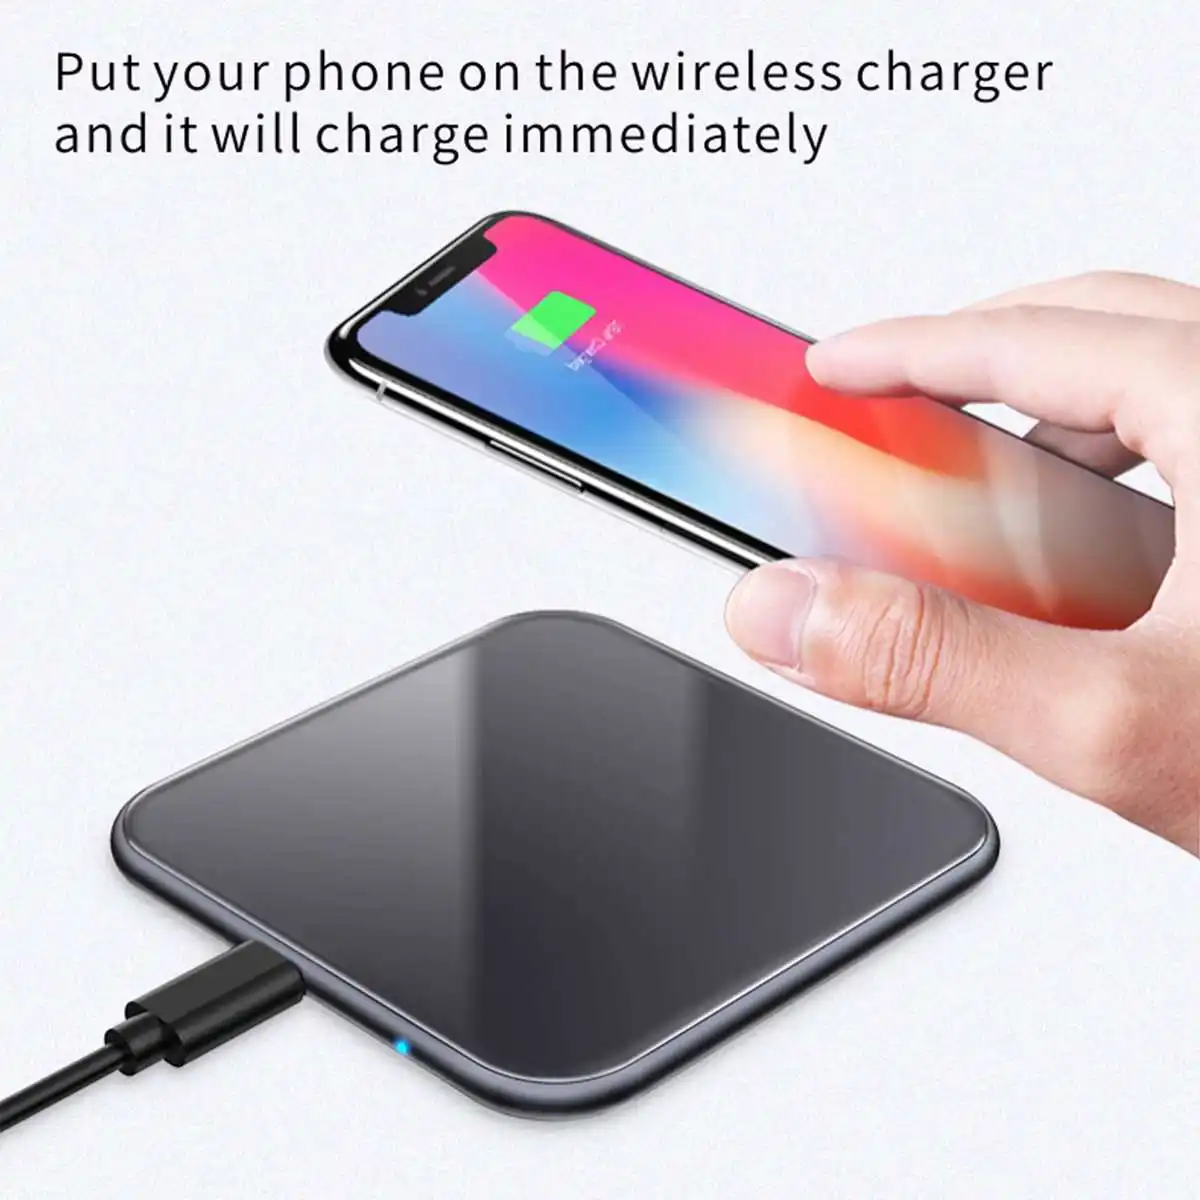 LED Indicator Light Charger Portable Mobile Phone Charger Wireless Tablet Charger For Wireless Charging Mobile Phone Laptop